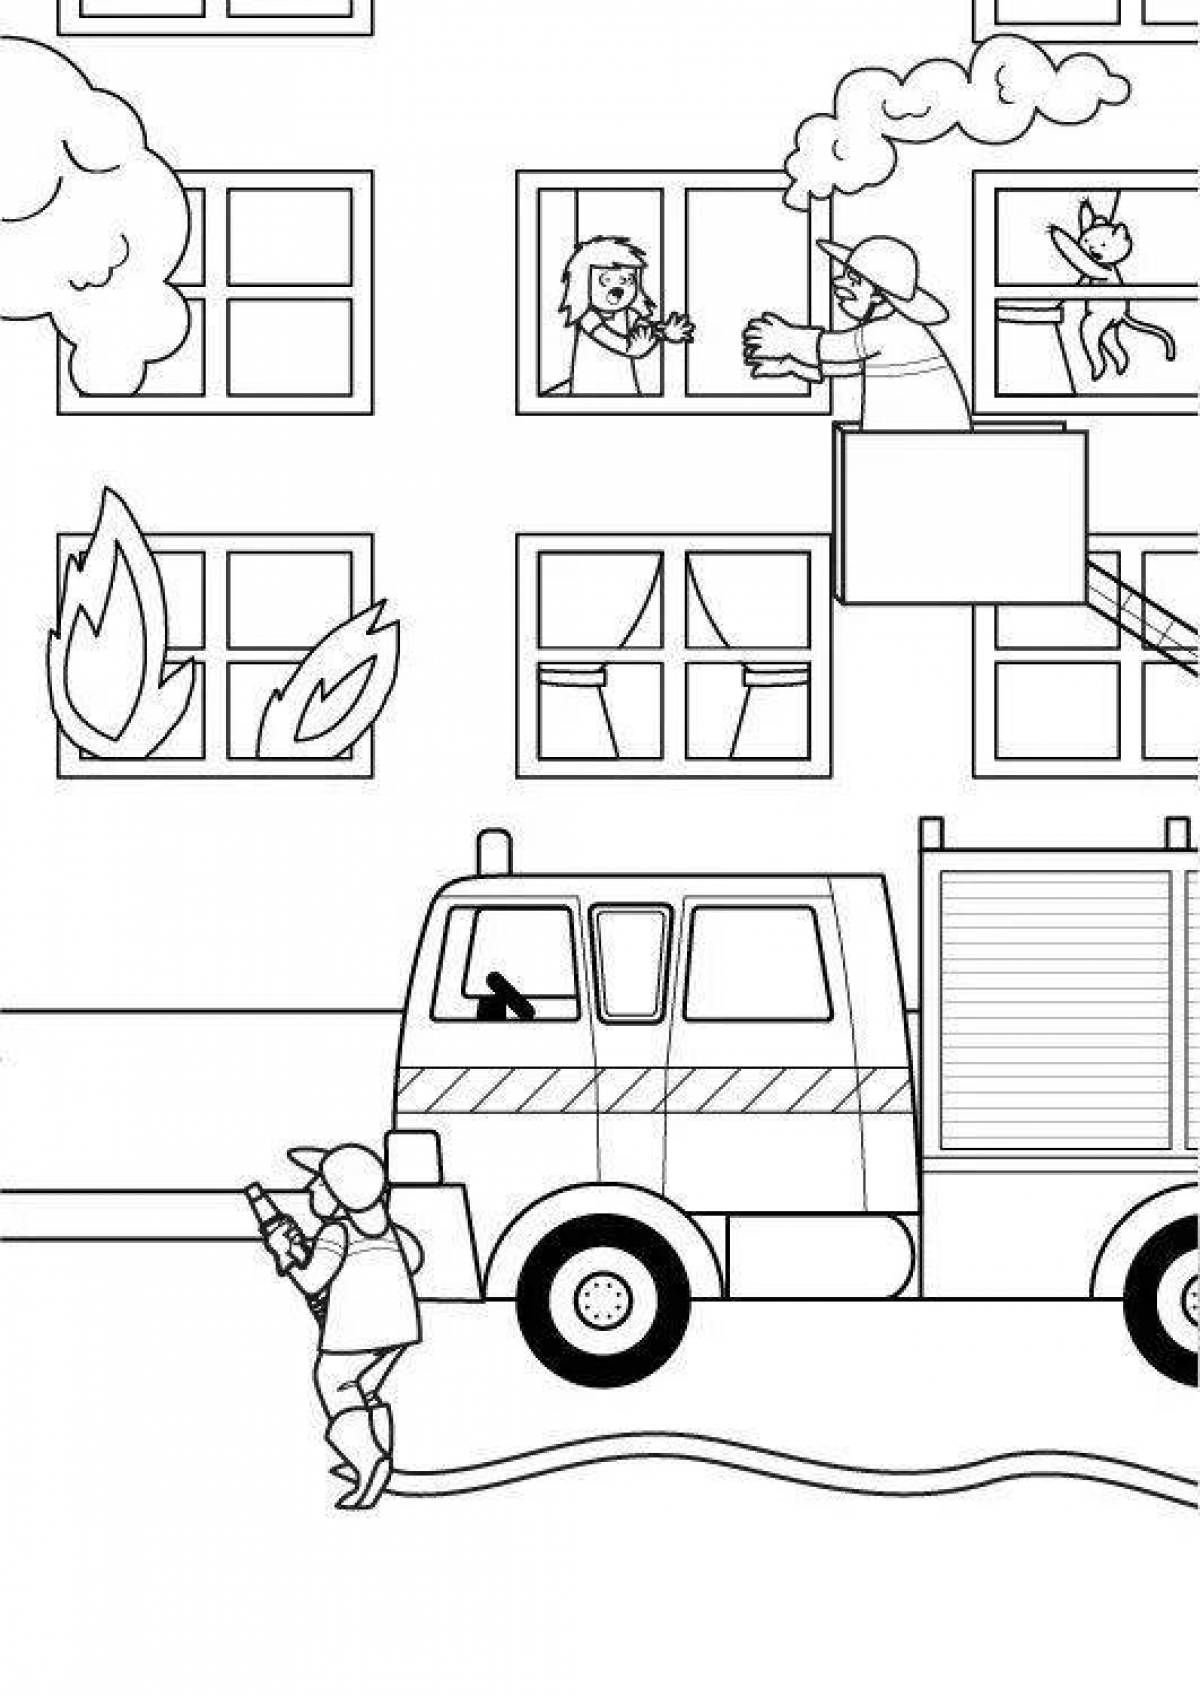 Coloring book fire safety for preschoolers